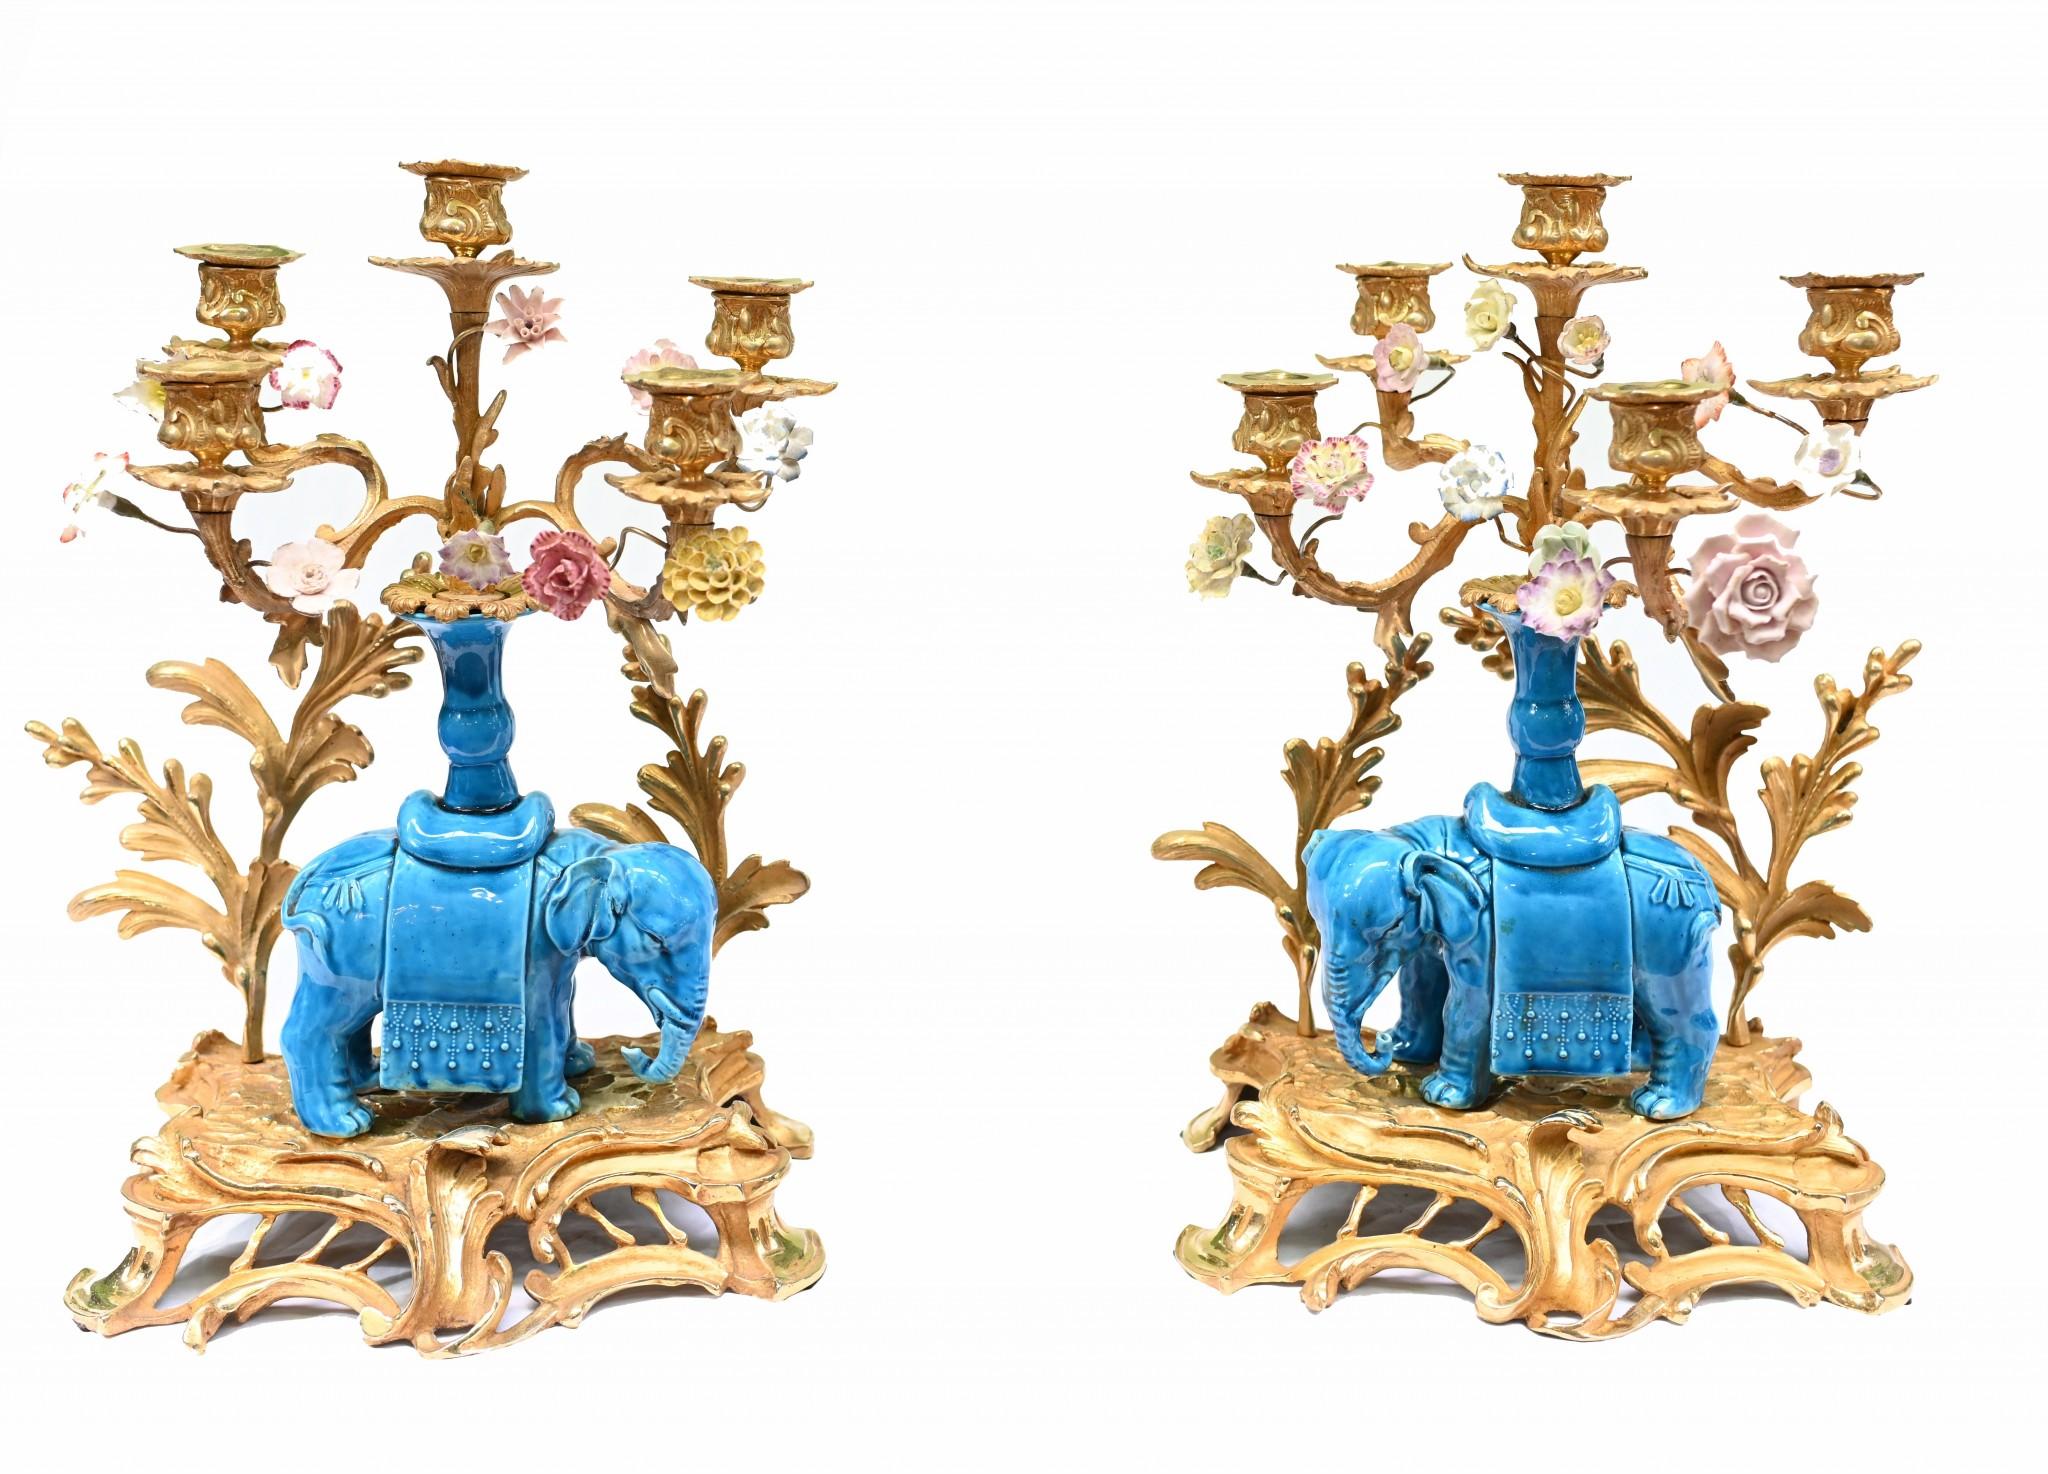 Stunning pair of porcelain elephant and gilt candelabras
Such a great look to this eye catching pair which are a perfecct left and right
The elephant spports the five branches of the candelabras
There are also various encrusted porcelain flowers
The